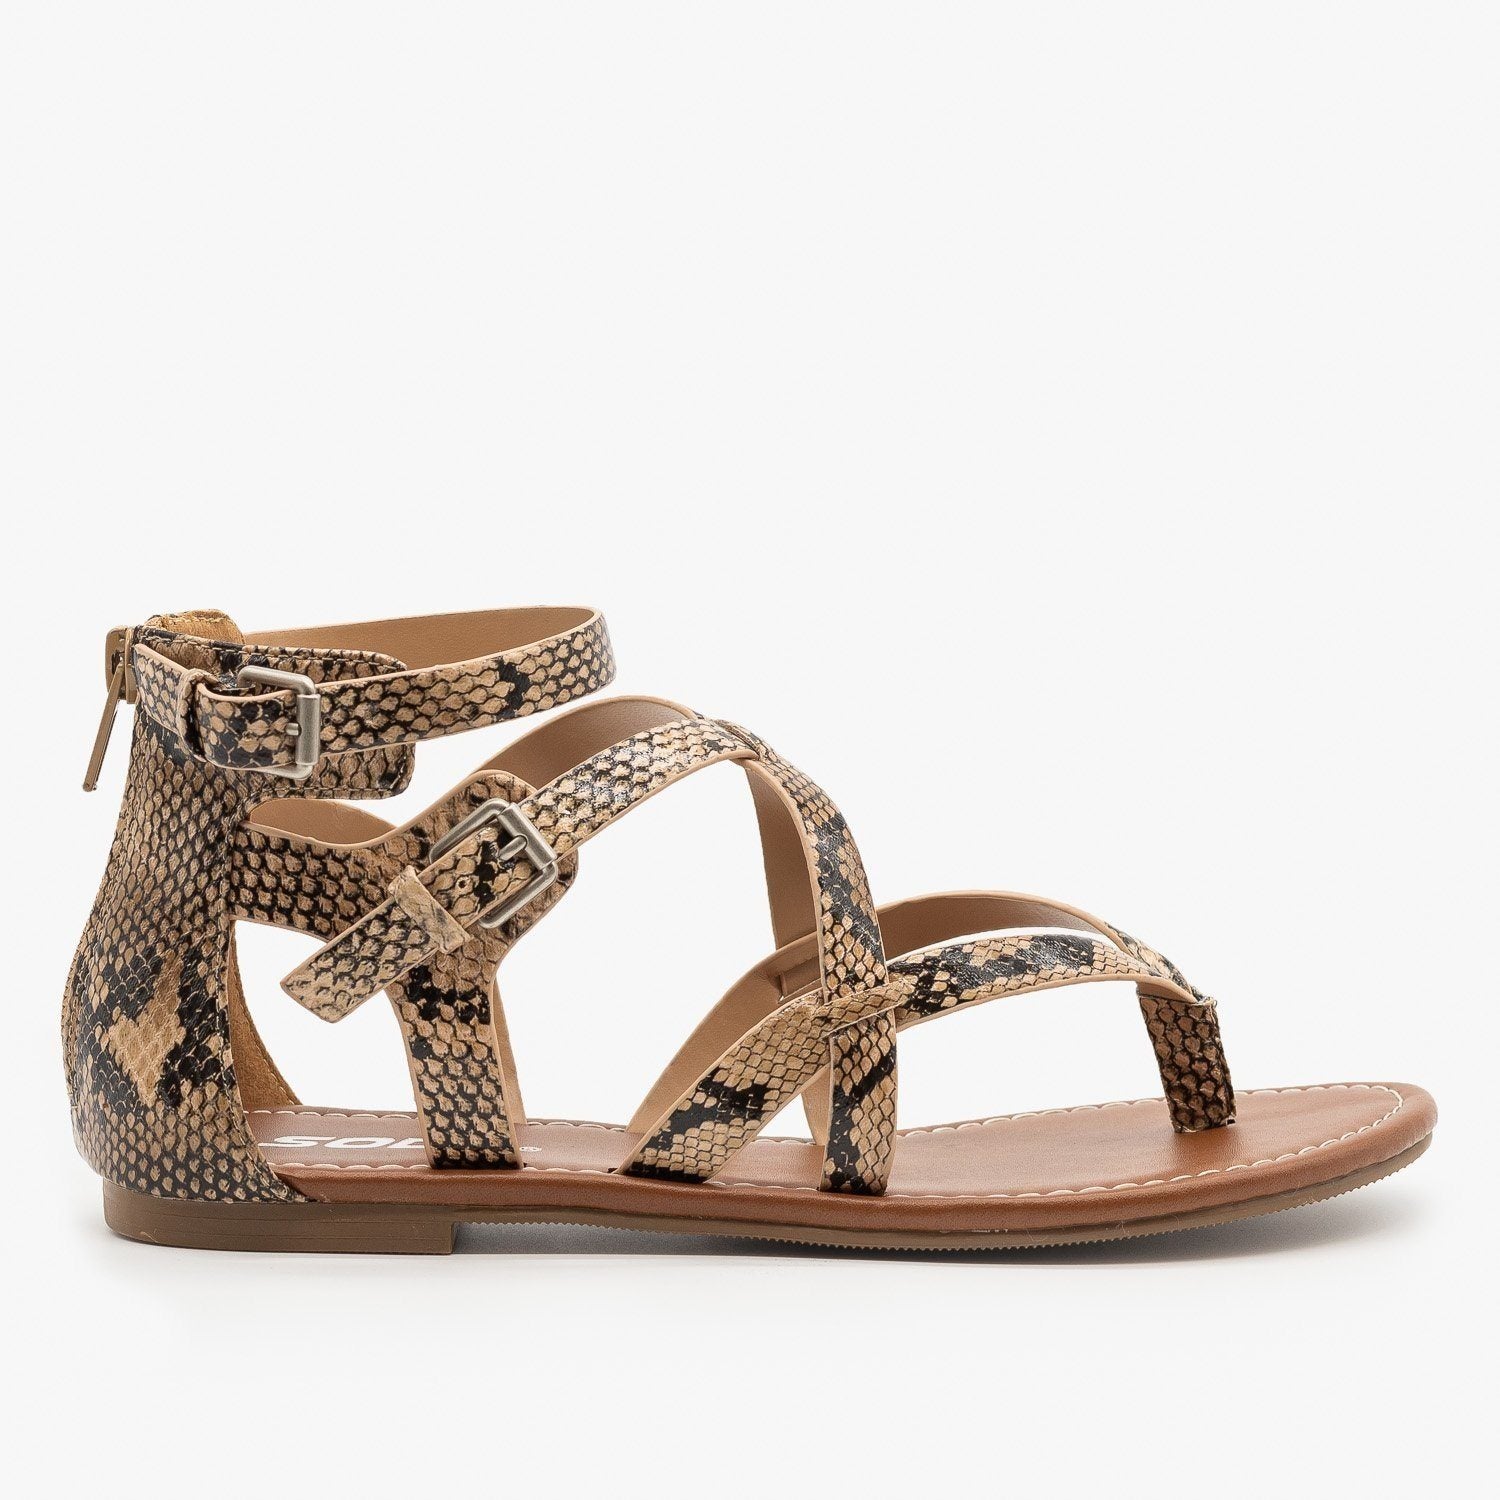 criss cross strappy sandals